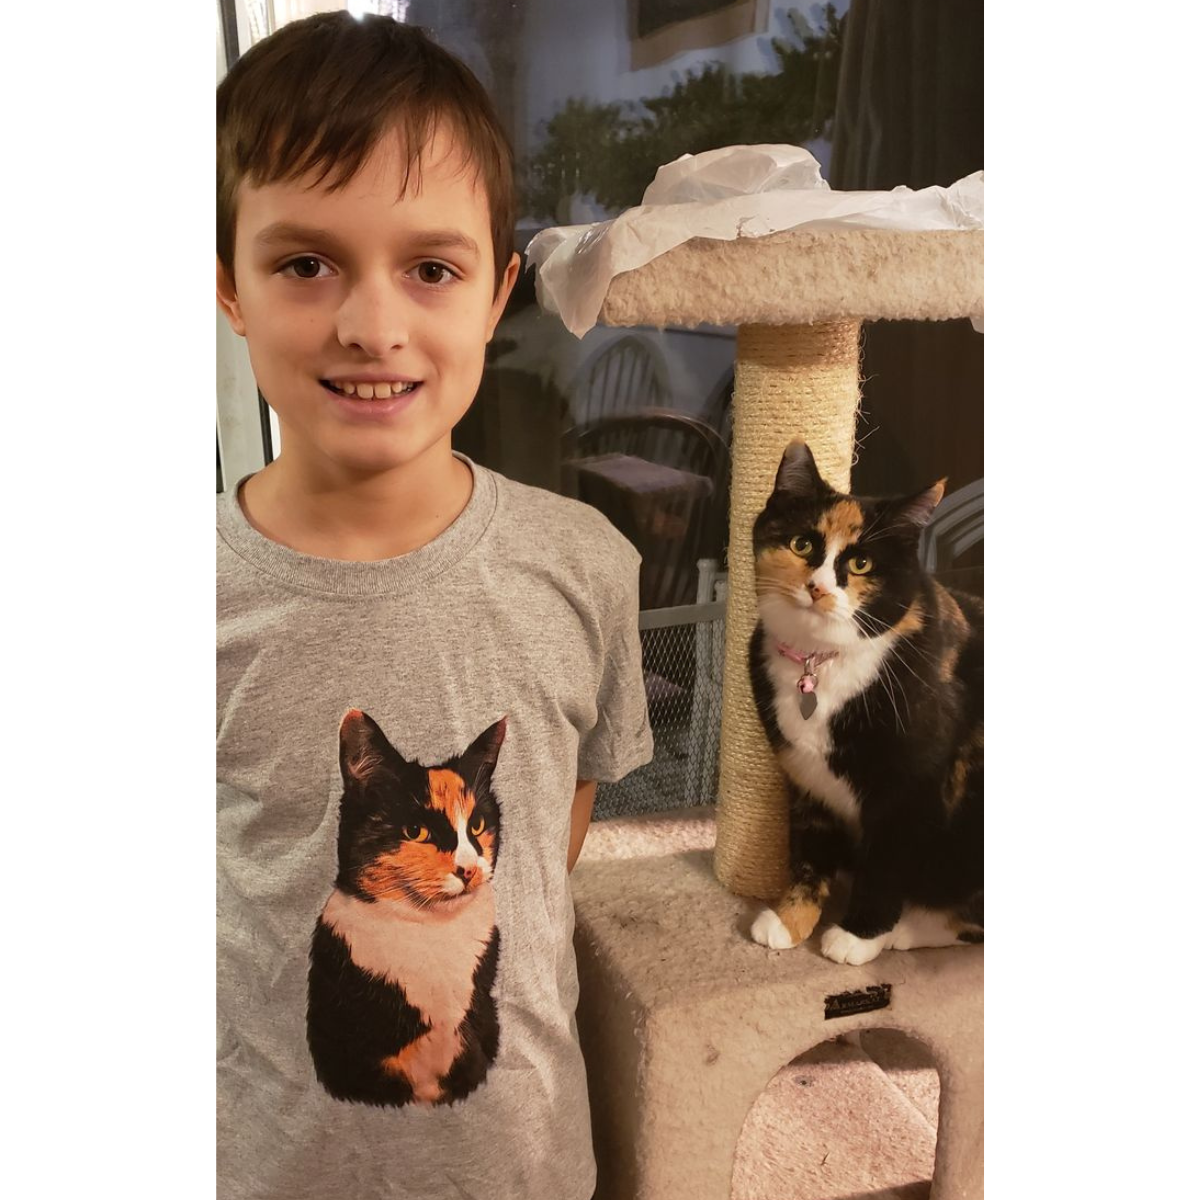 1 Personalized Cat Shirt For Cat Lovers - Put Your Cats On Shirt